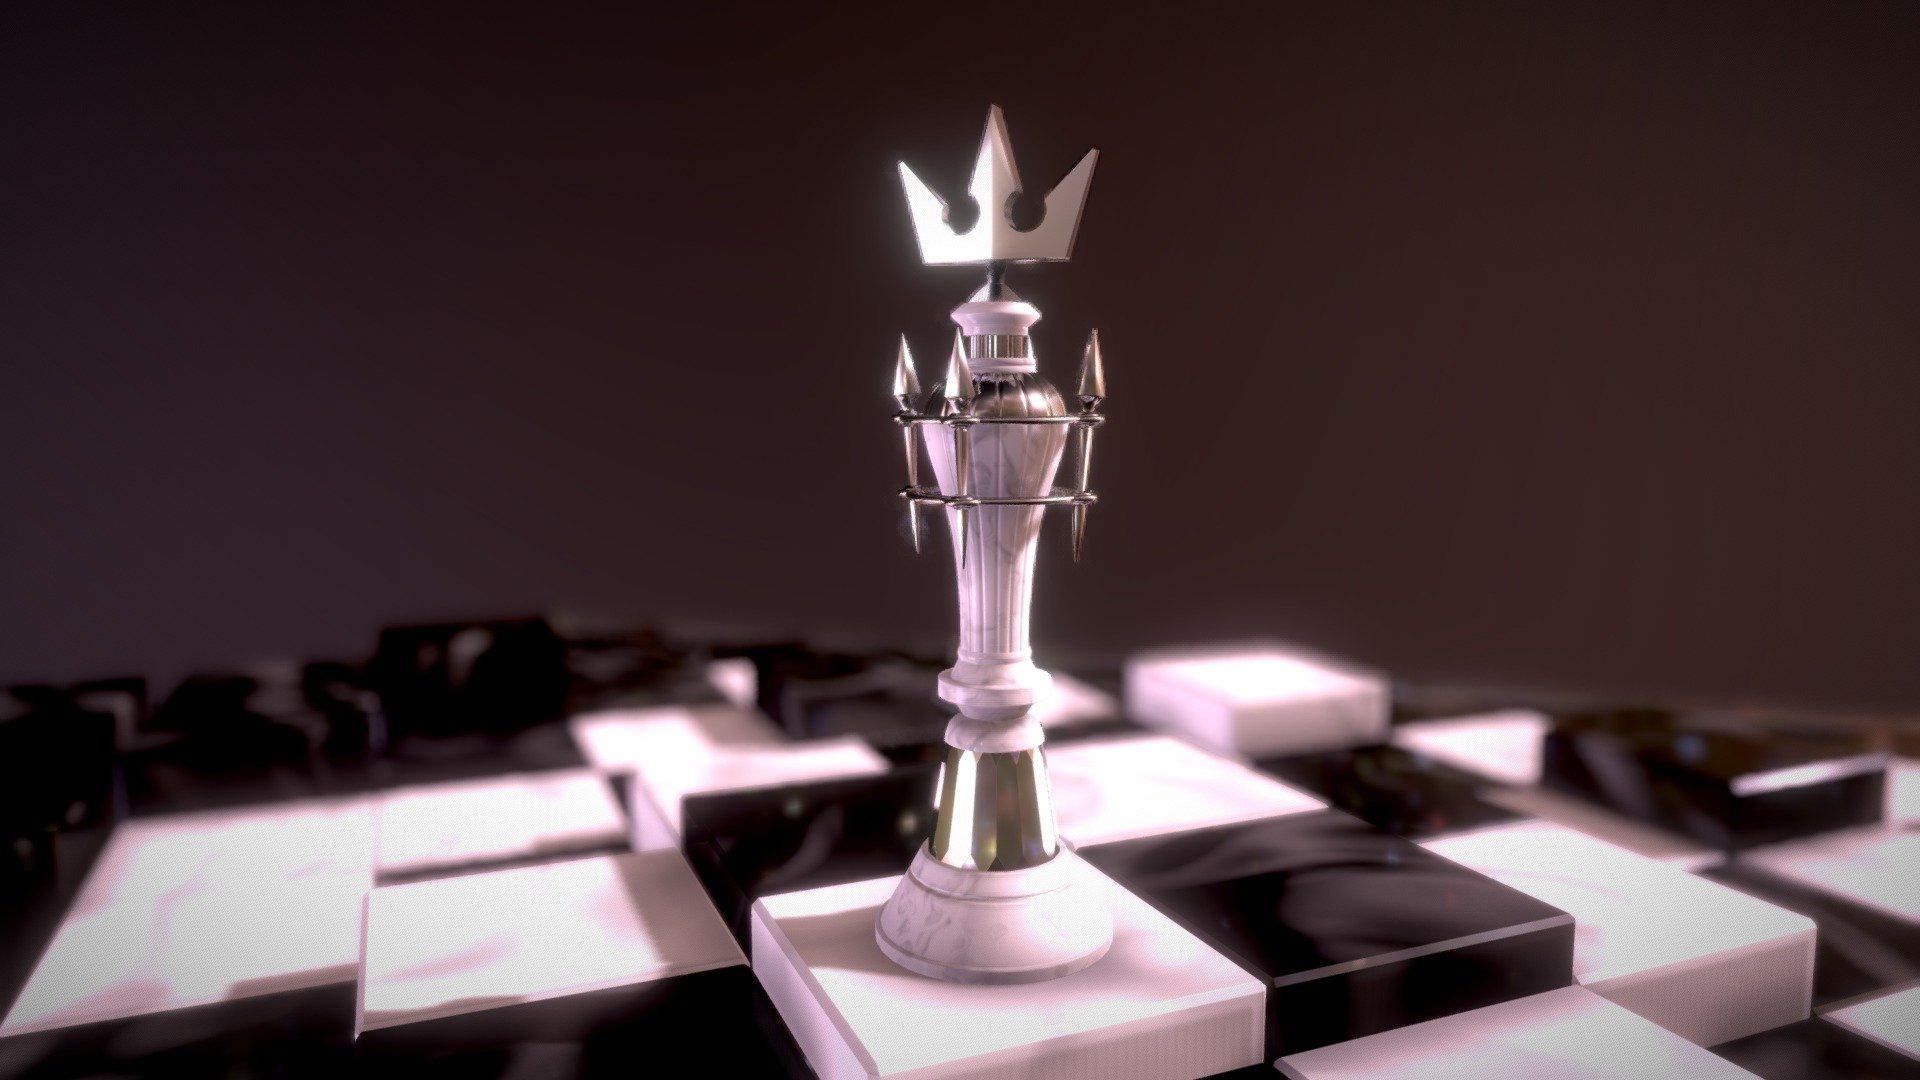 A remake of my old Sora's Chess piece + the chess board.

Model remade from strach with better topology employed. Textures were procedurally generated on Blender itself and baked.

Most pieces of the model are individual meshes with the exception of the outer rings and the spikes. The chess board tiles are separated, individual meshes. No AO baked maps.

If you have any questions please ask me and I'll answer them 3d model